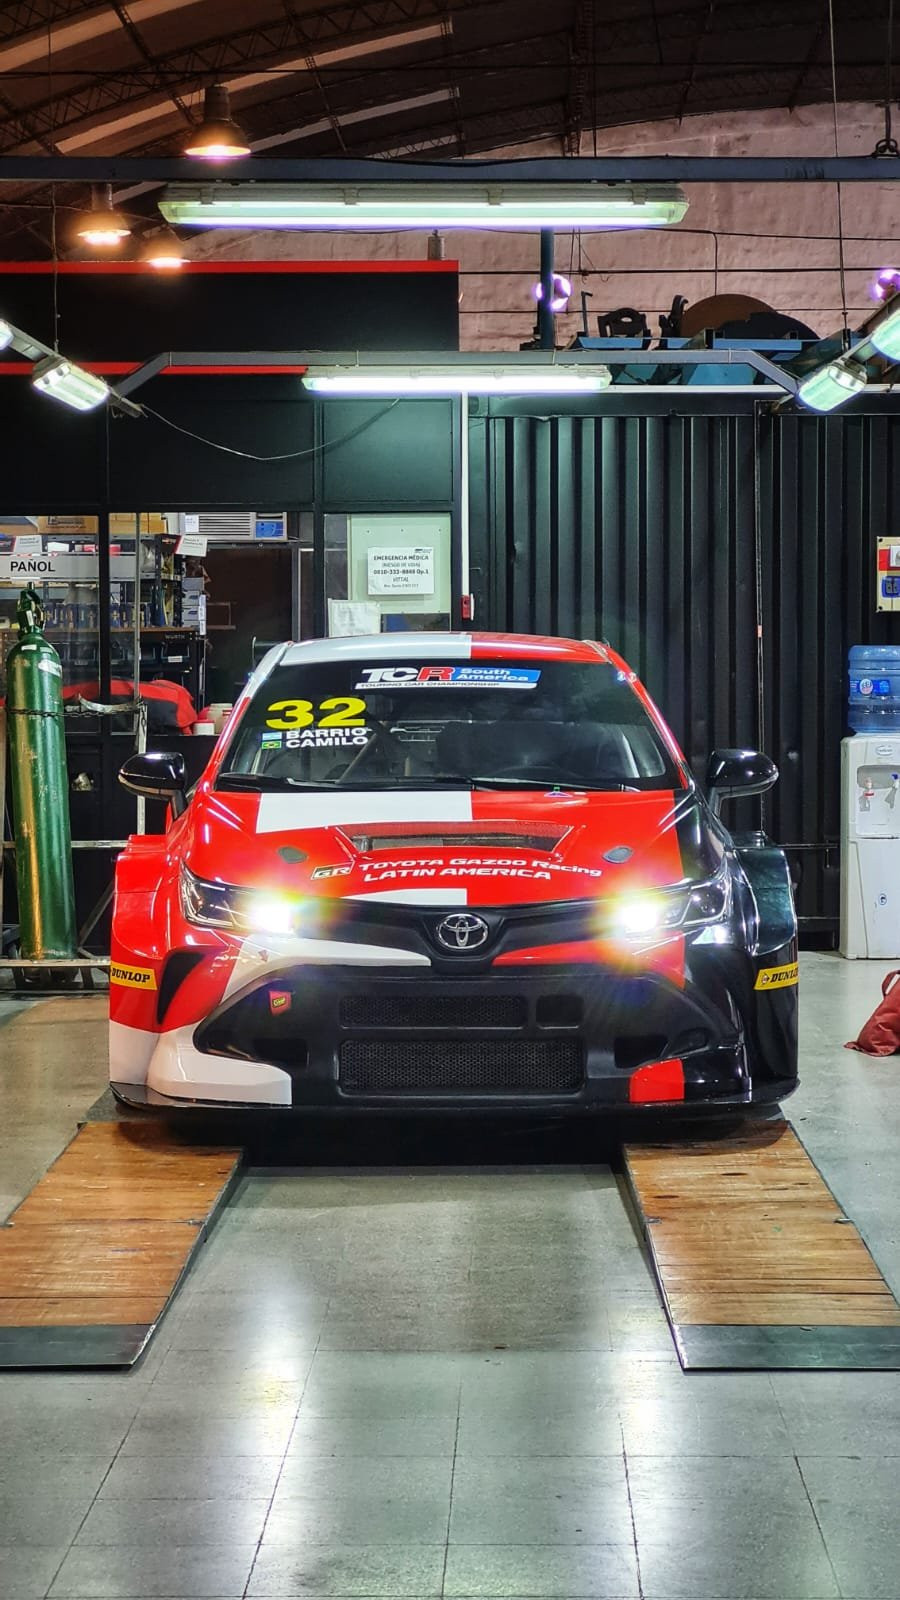 Toyota Gazoo Racing unveils livery for new Corolla TCR